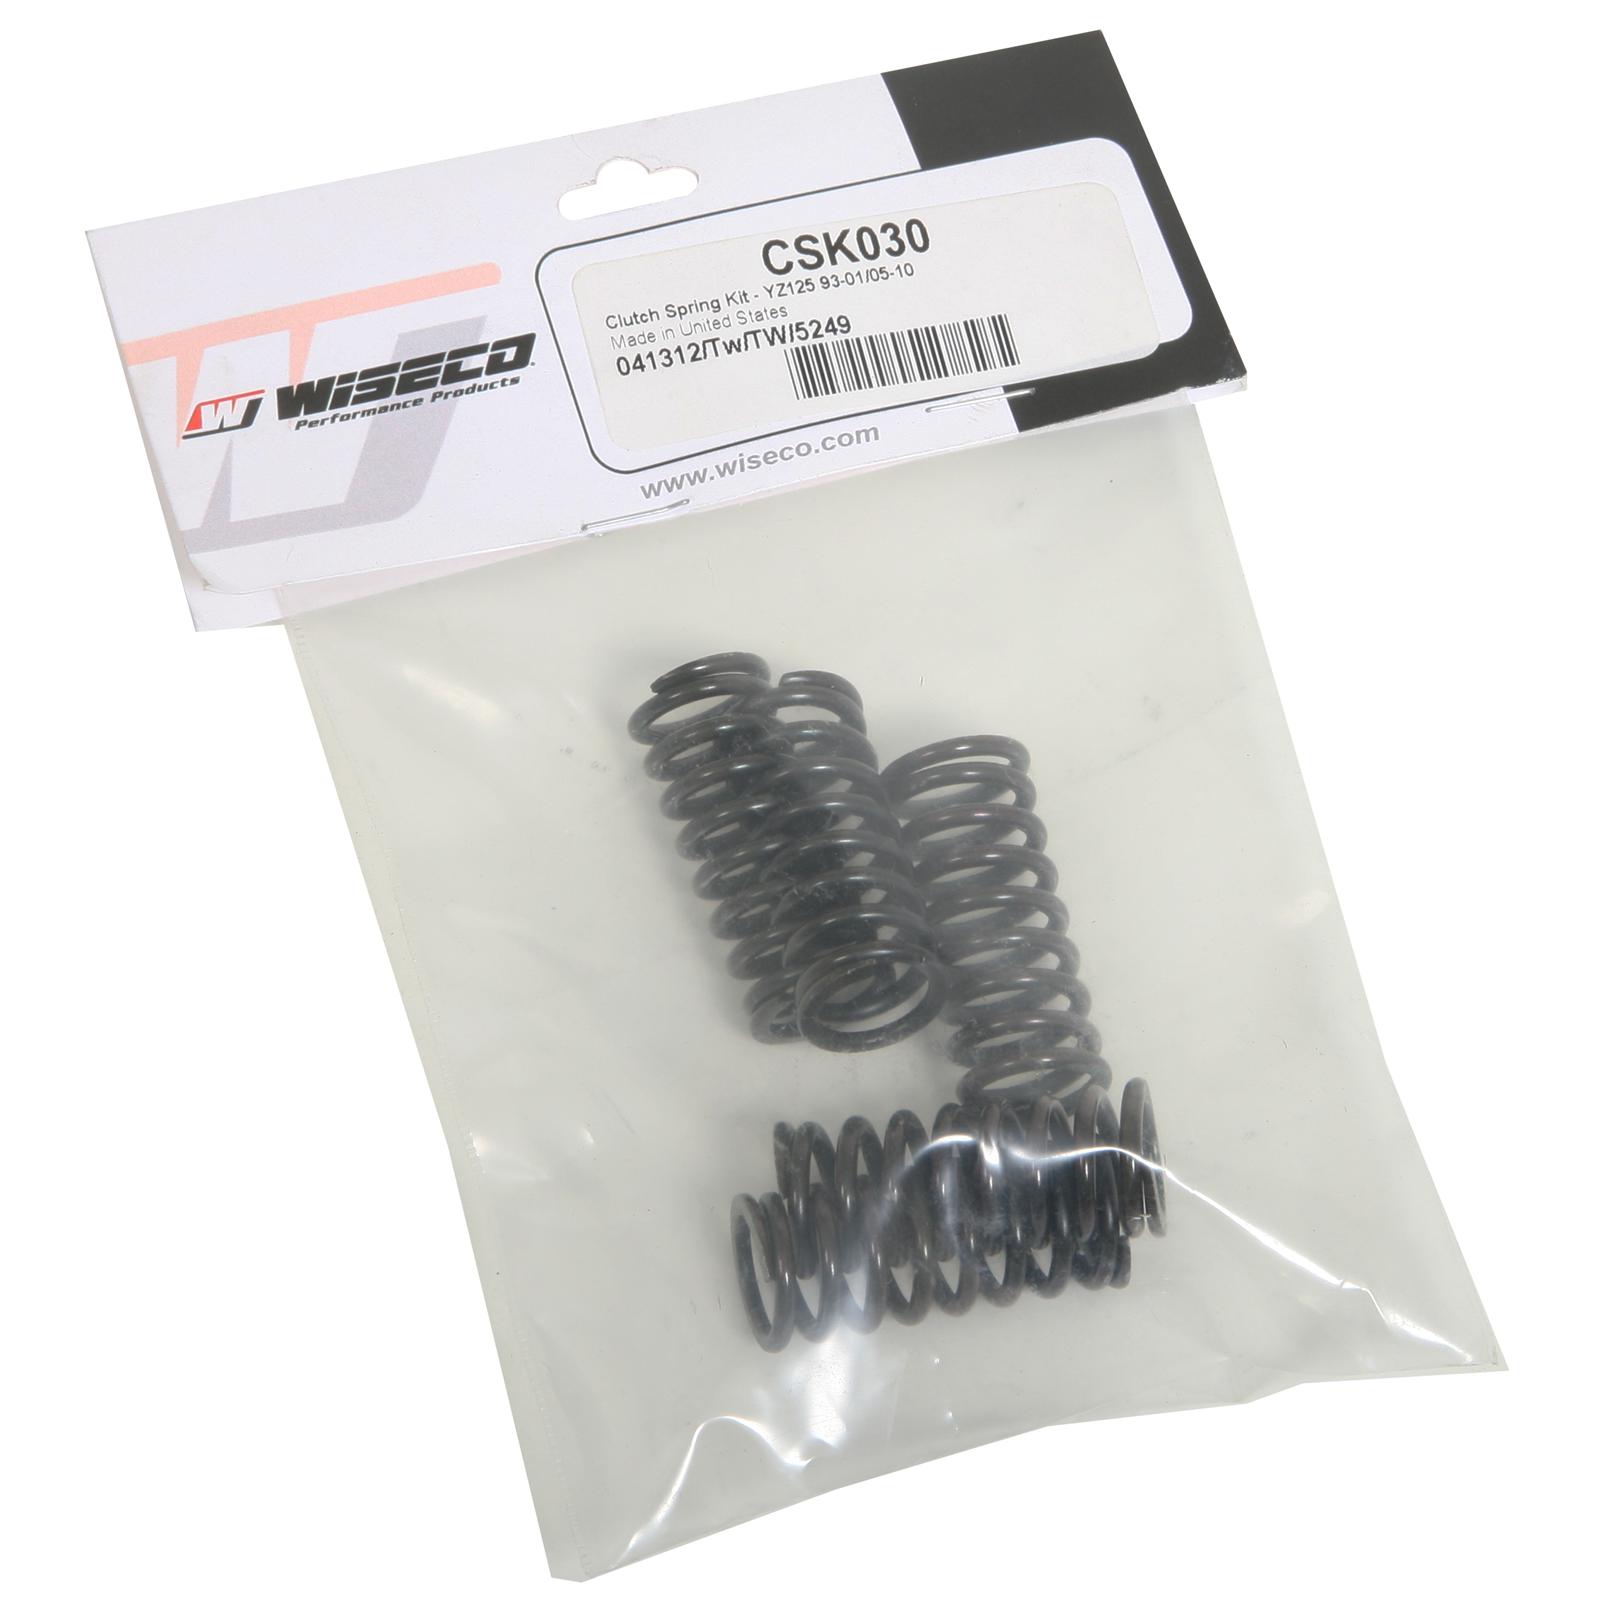 Wiseco CSK052 Wiseco Clutch Spring Kits | Summit Racing